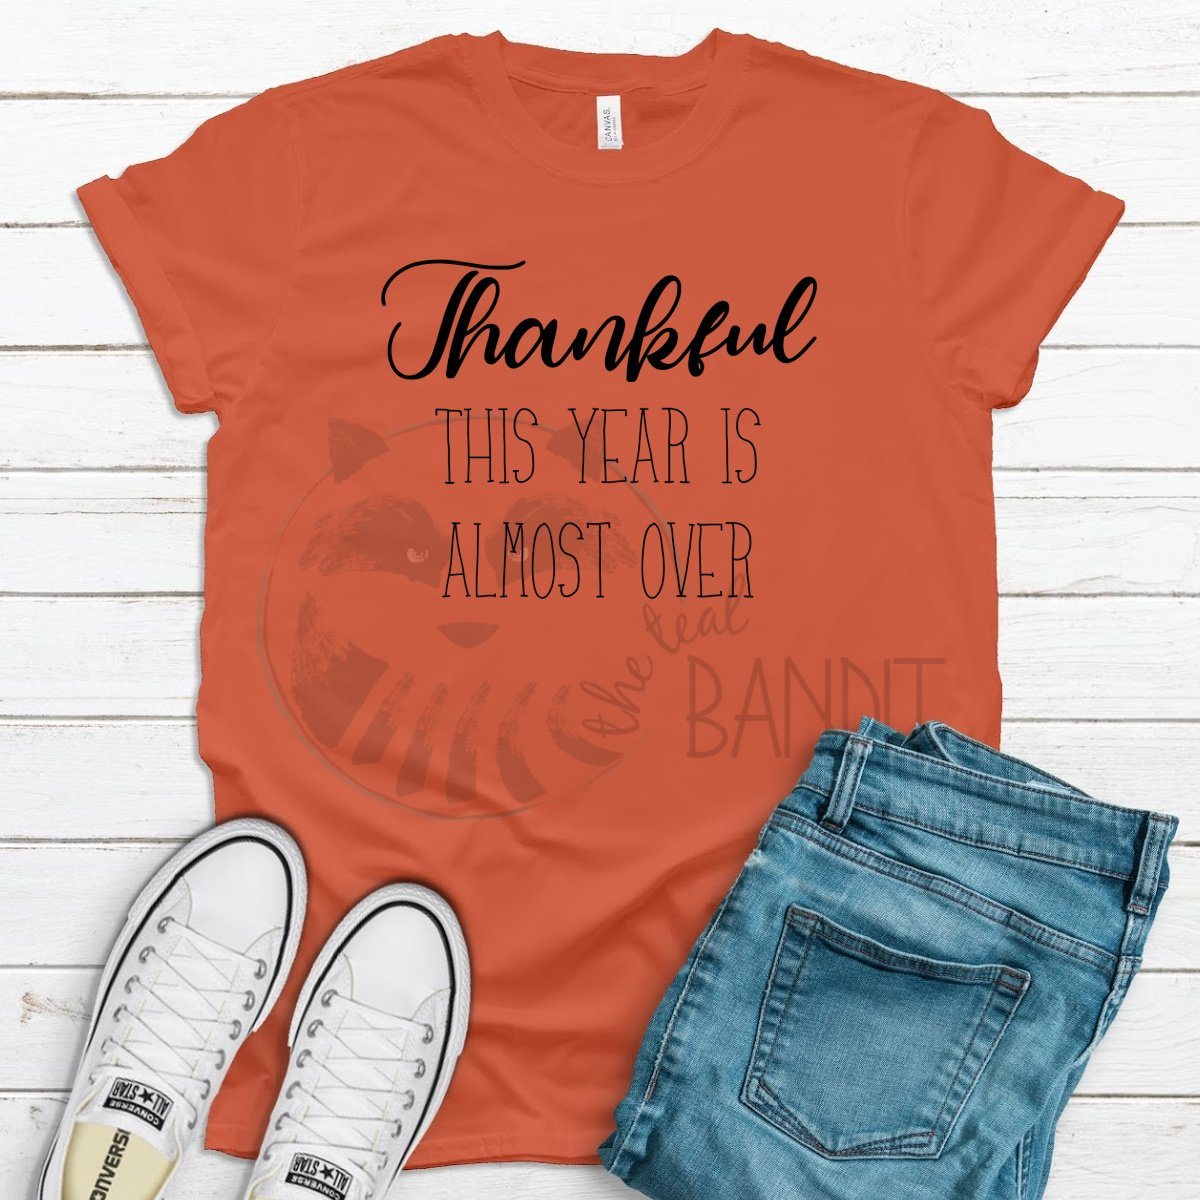 "Thankful this year is almost over" tee shirt Adult Tee Shirt The Teal Bandit 